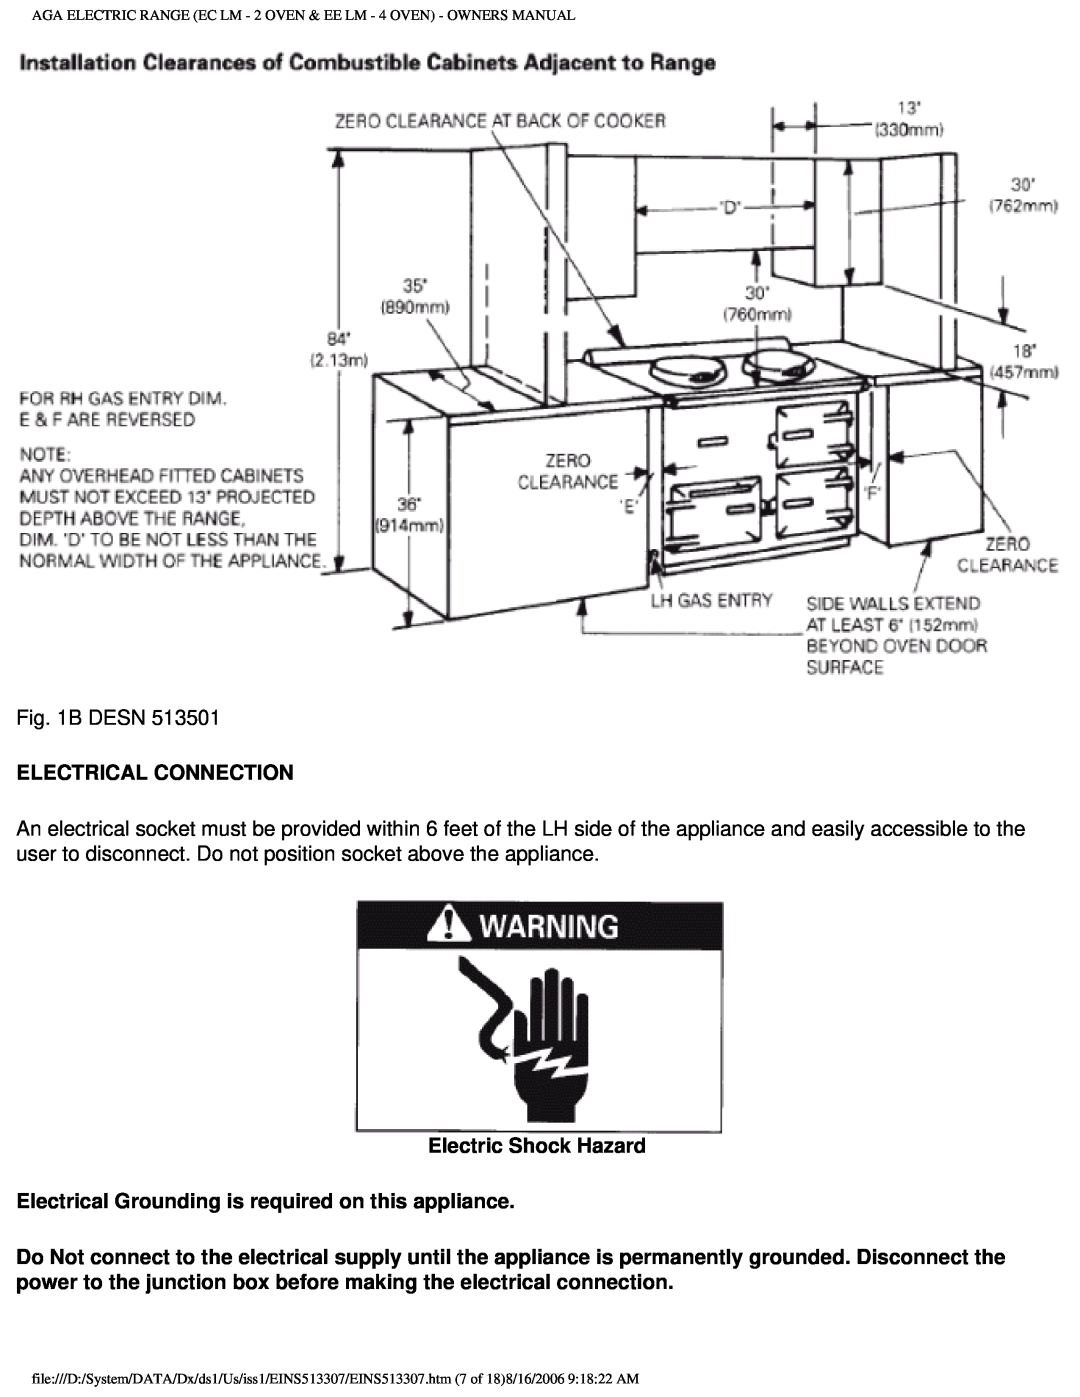 Aga Ranges EINS513307 owner manual Electrical Connection 